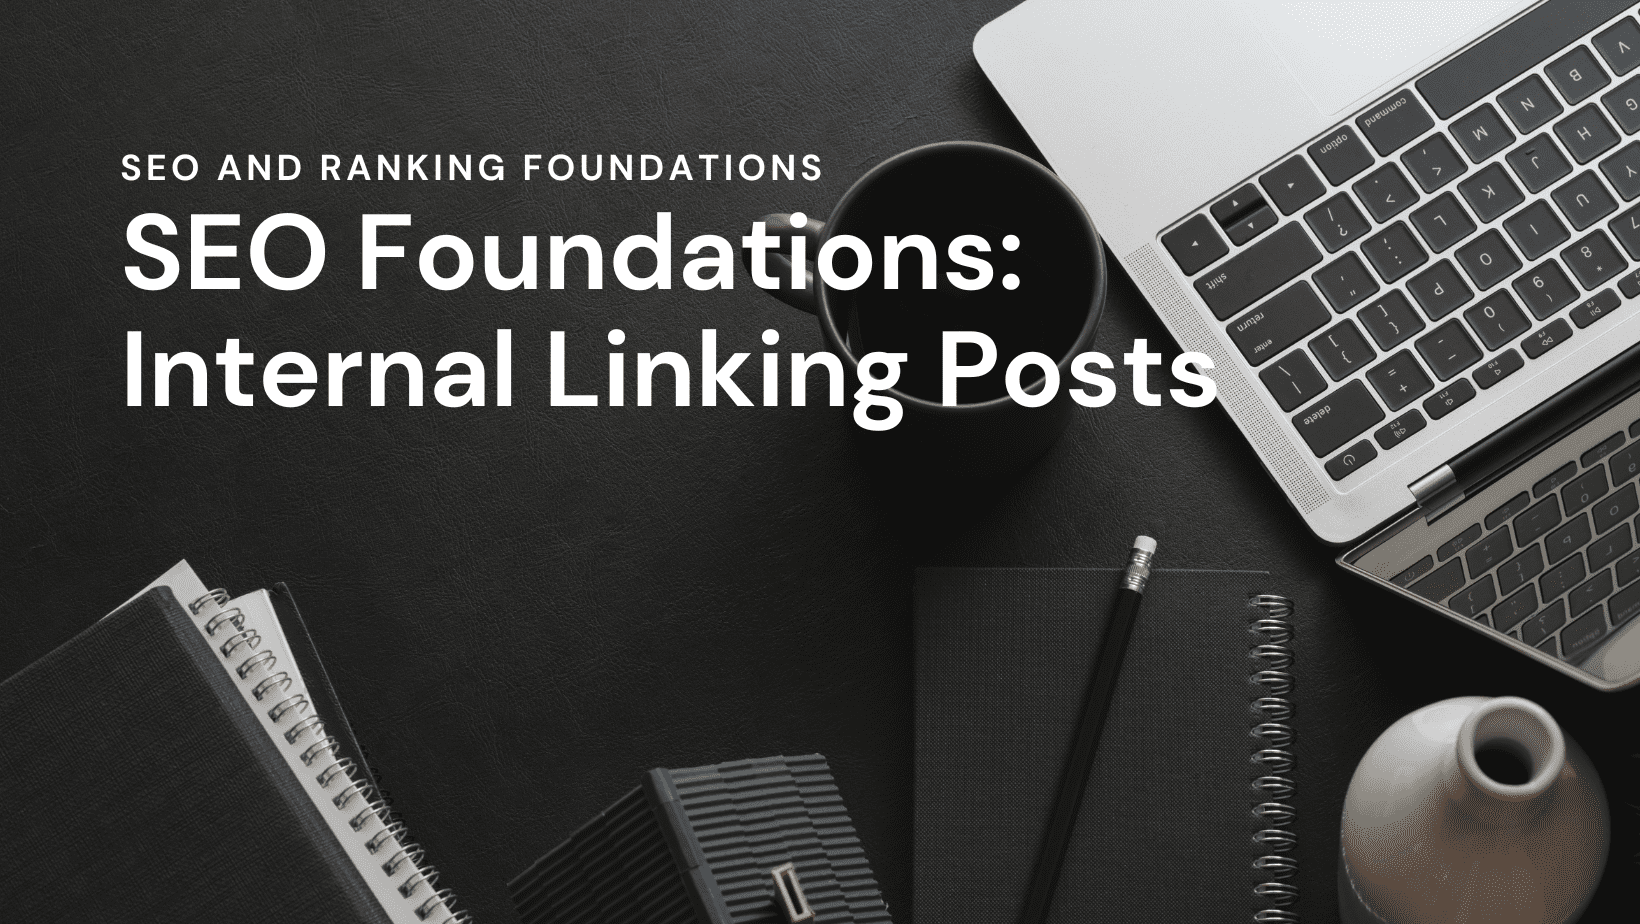 SEO and Ranking Foundations SEO Foundations: Internal Linking Posts